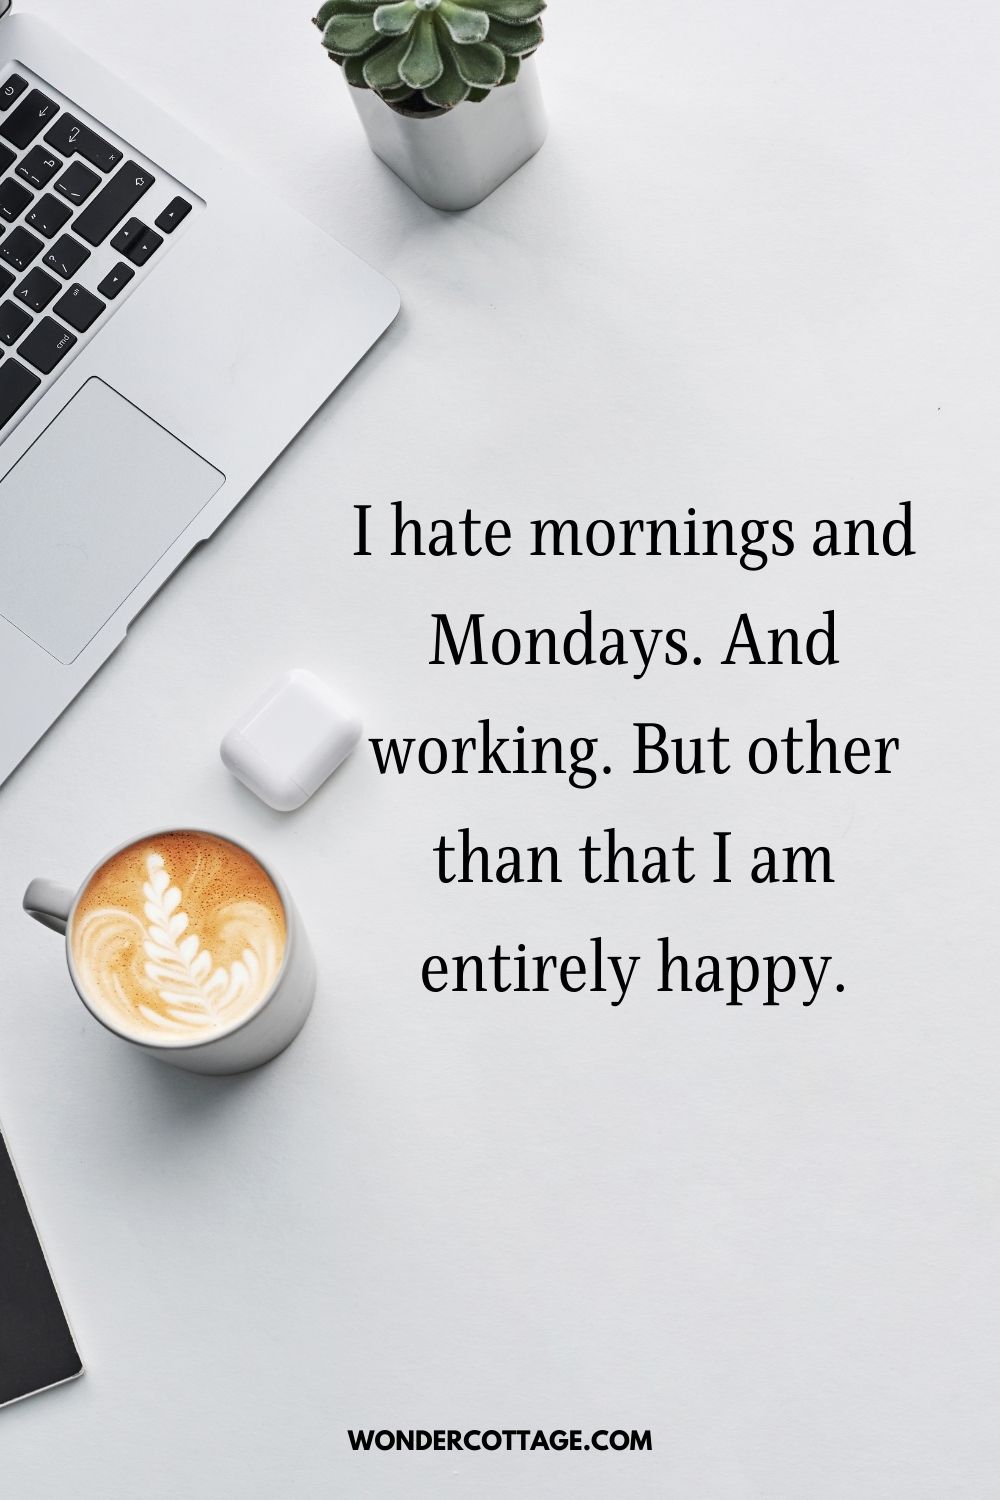 I hate mornings and Mondays. And working. But other than that I am entirely happy.